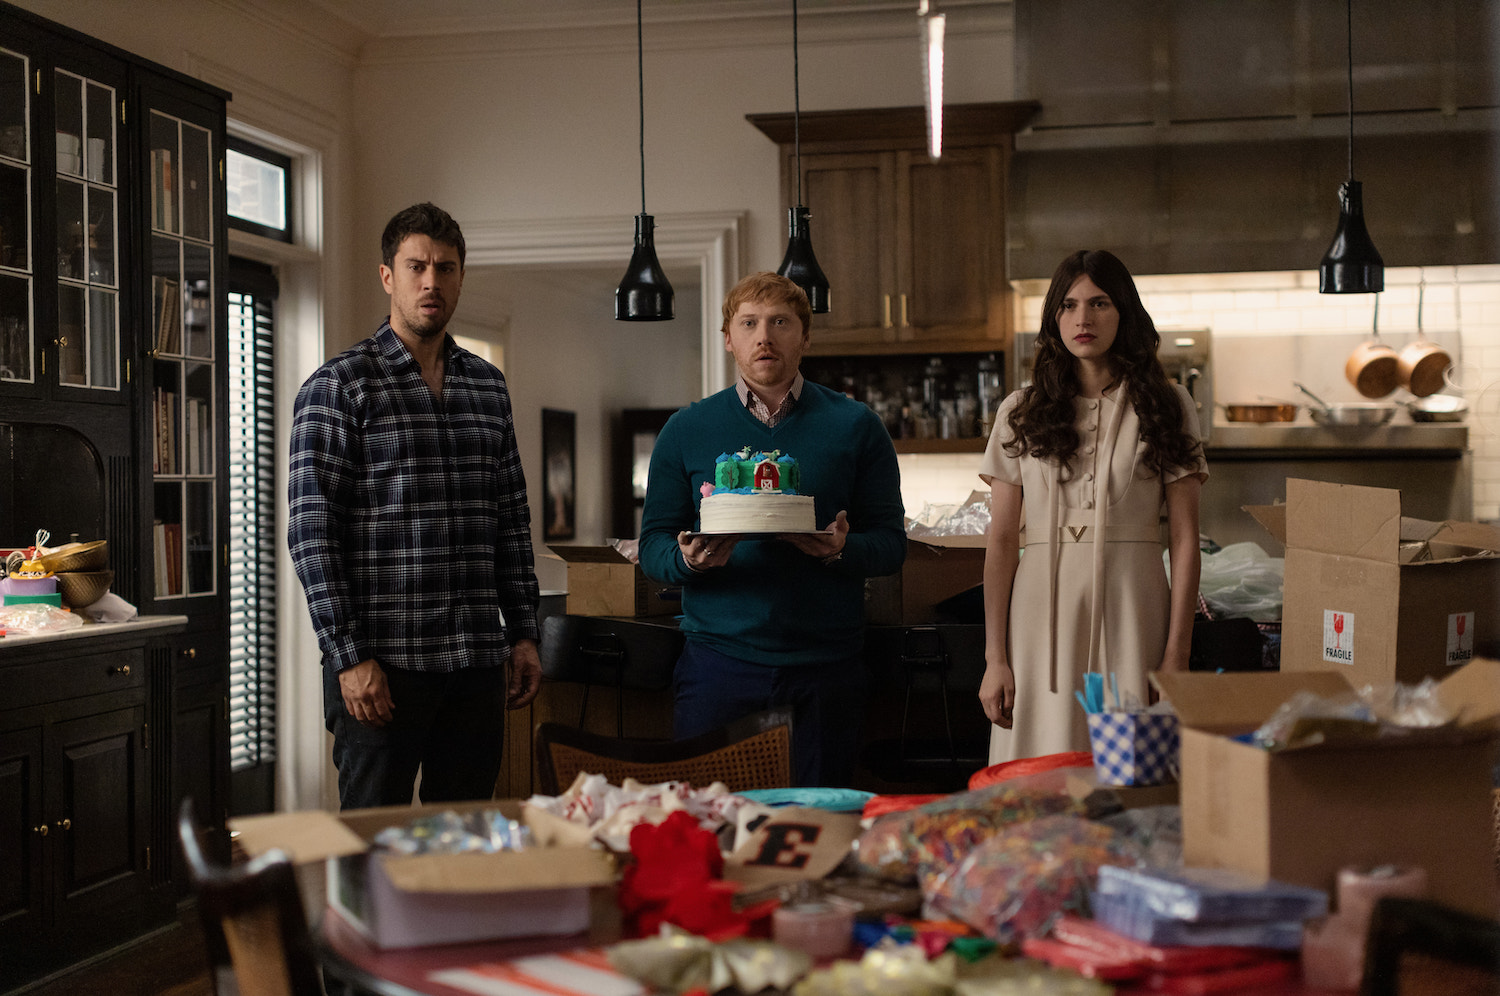 'Servant' Season 4 production still featuring Toby Kebbell, Rupert Grint, and Nell Tiger Free standing in the Turner's kitchen while Julian holds a cake.